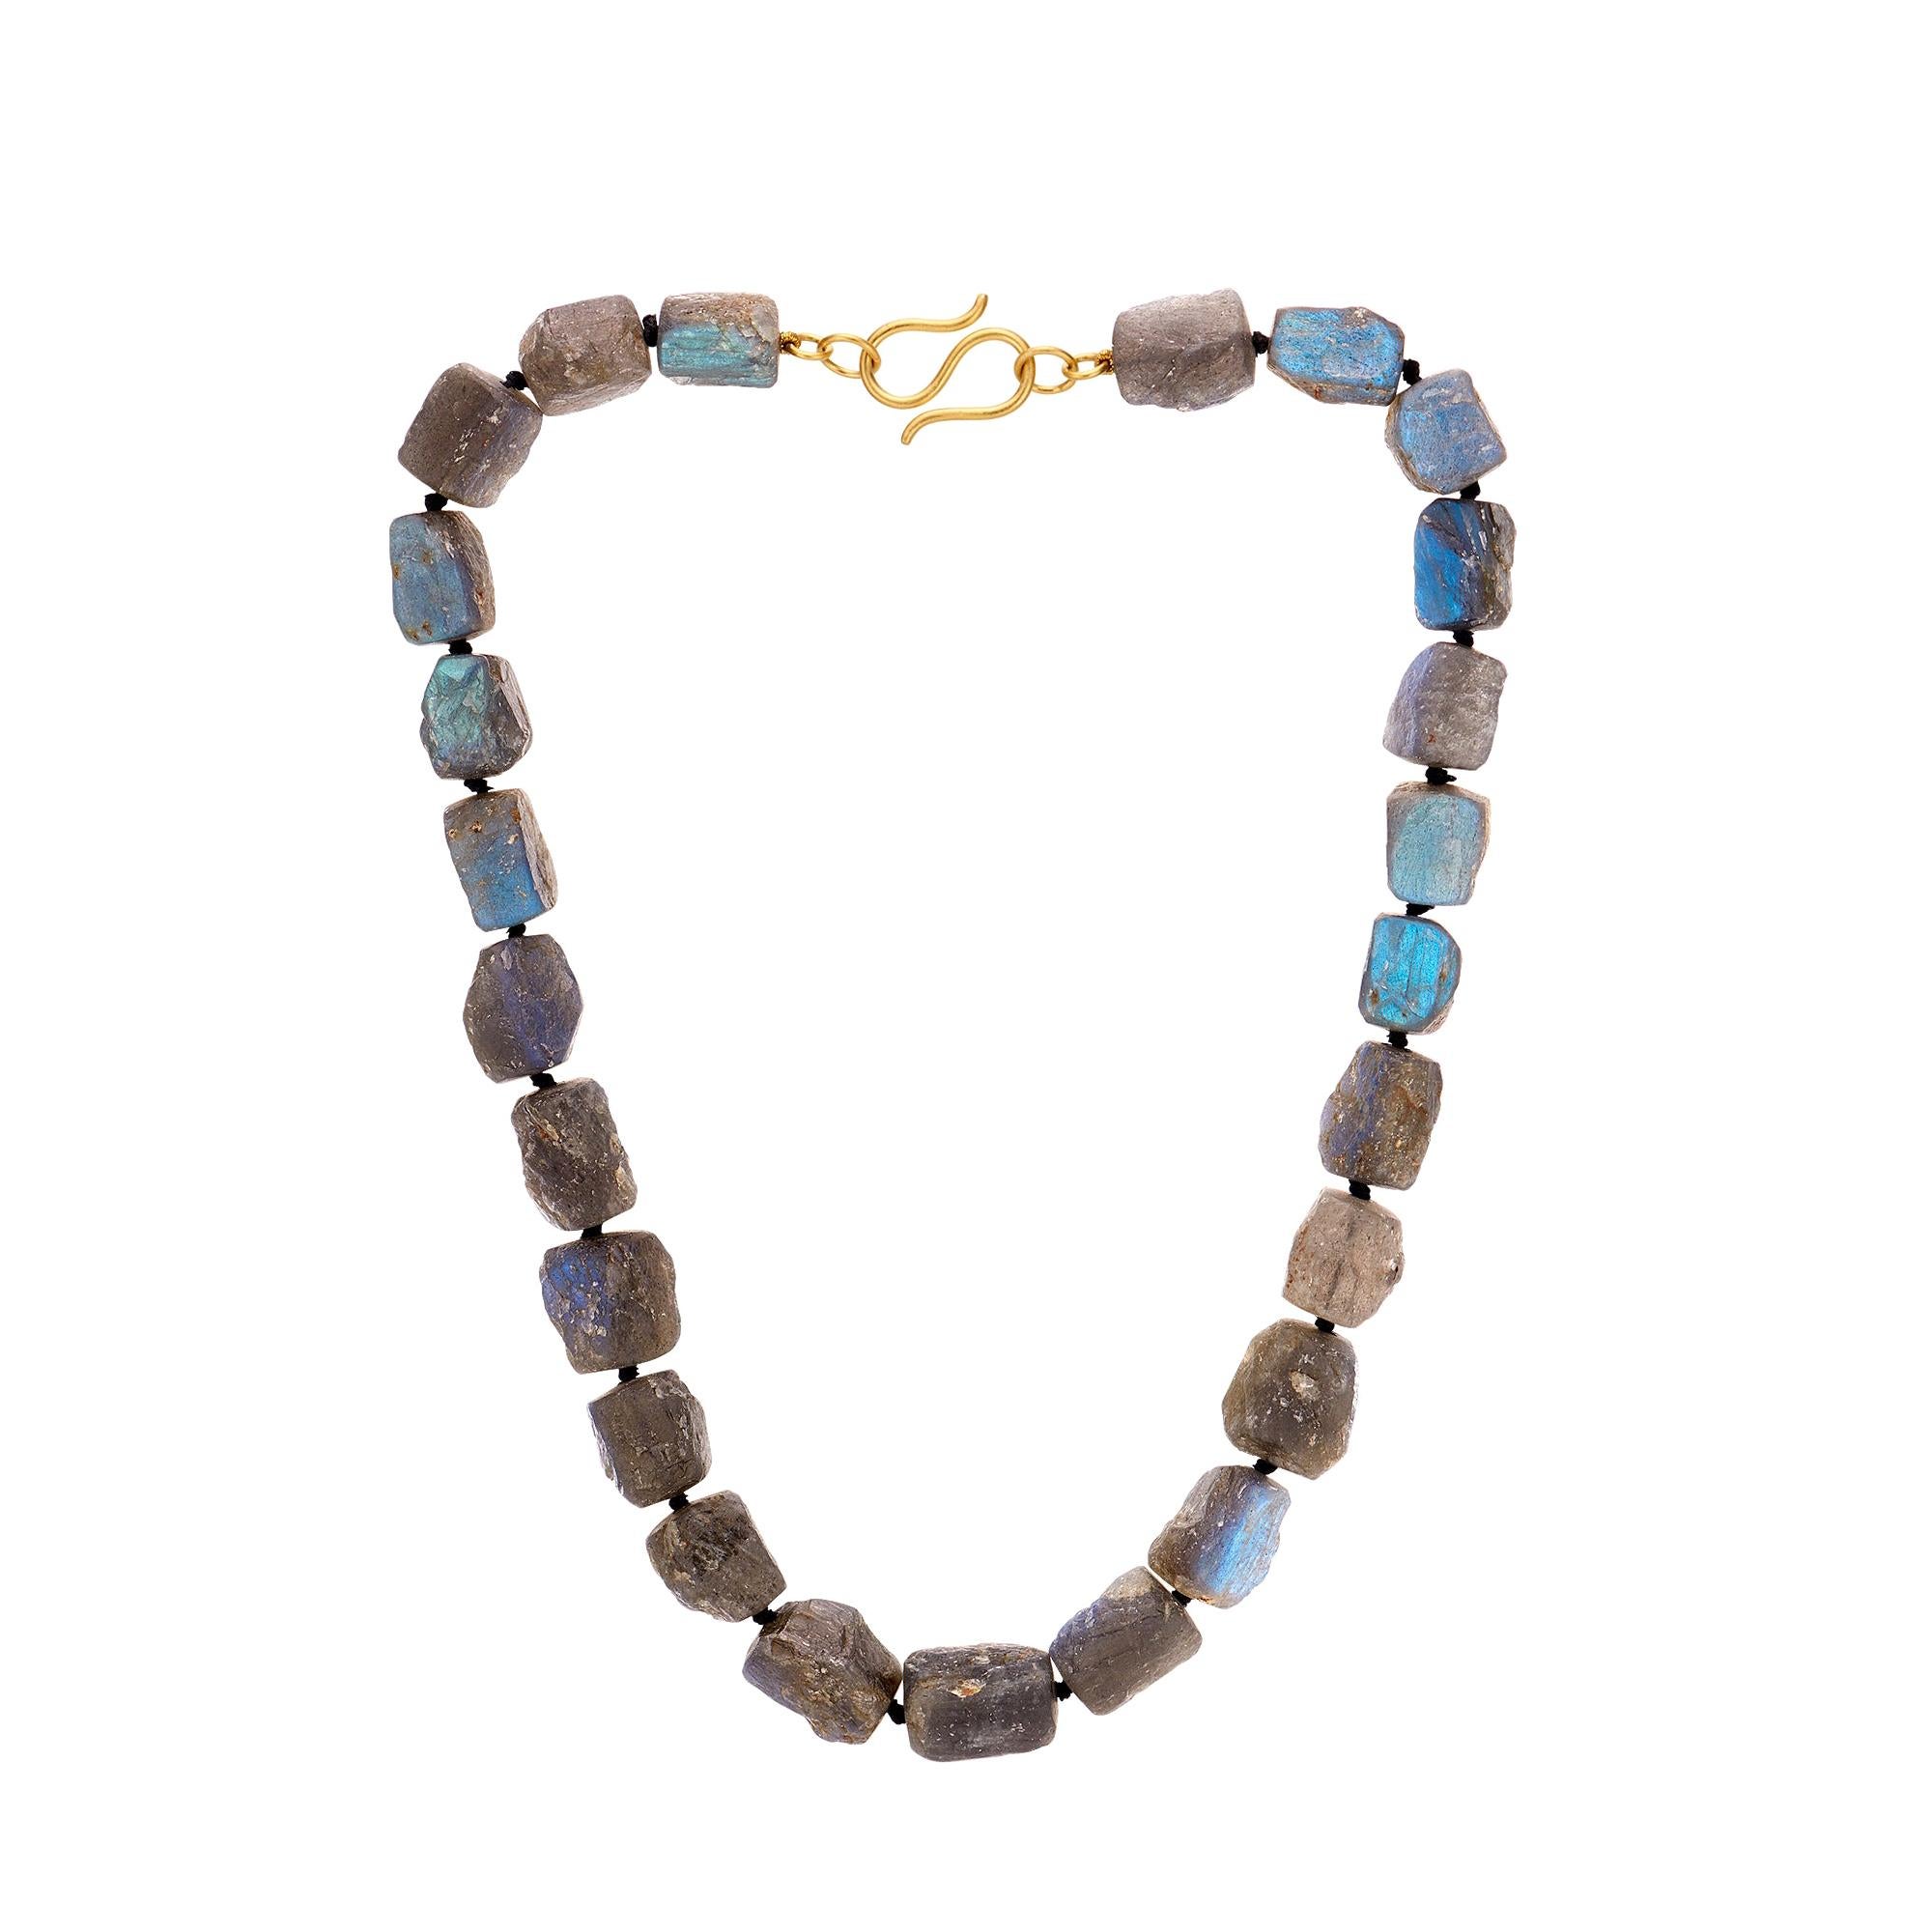 Labradorite Beaded Necklace with Blue Iridescent Flashes and 22 Gold Clasp